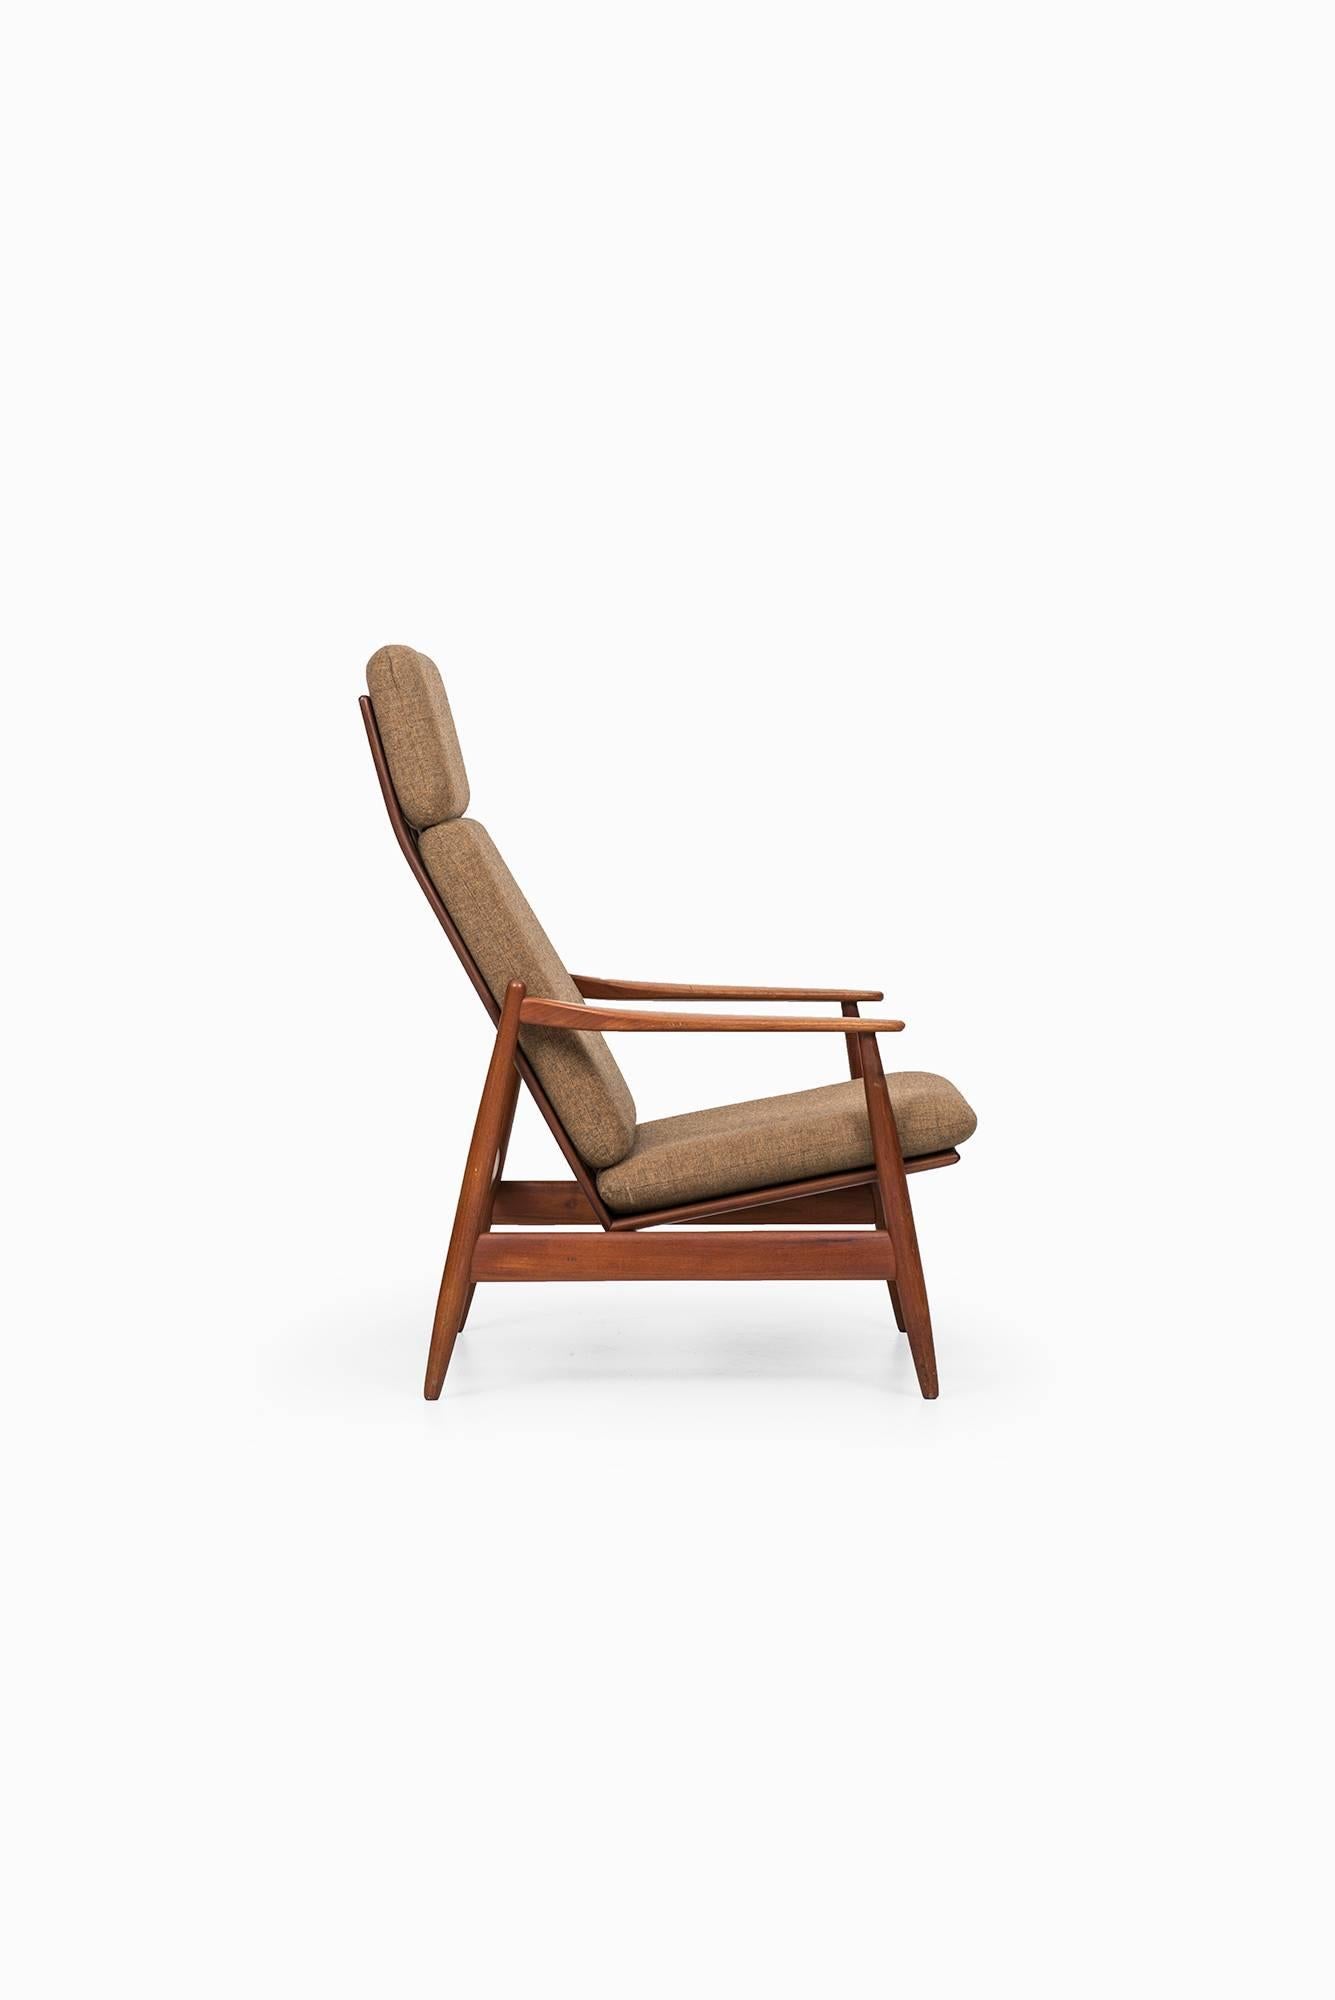 Mid-Century Modern Poul Volther Easy Chair Model 340 by Frem Røjle in Denmark